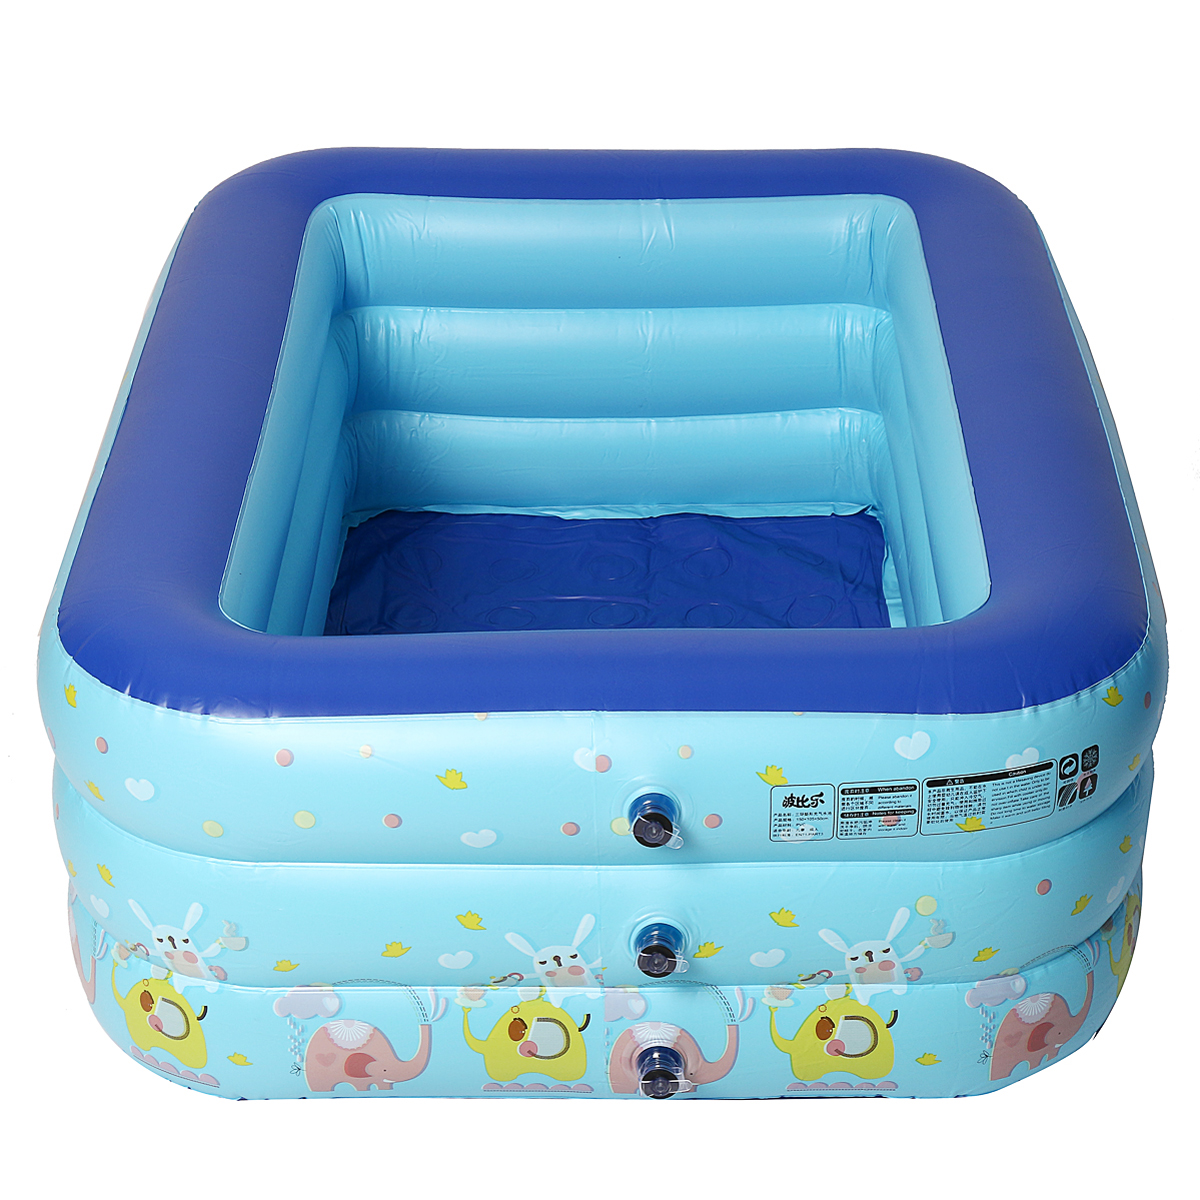 1-4-Persons-Inflatable-Swimming-Pool-Outdoor-Summer-Inflatable-Pool-Air-Pump-for-Children-Adult-1710979-4